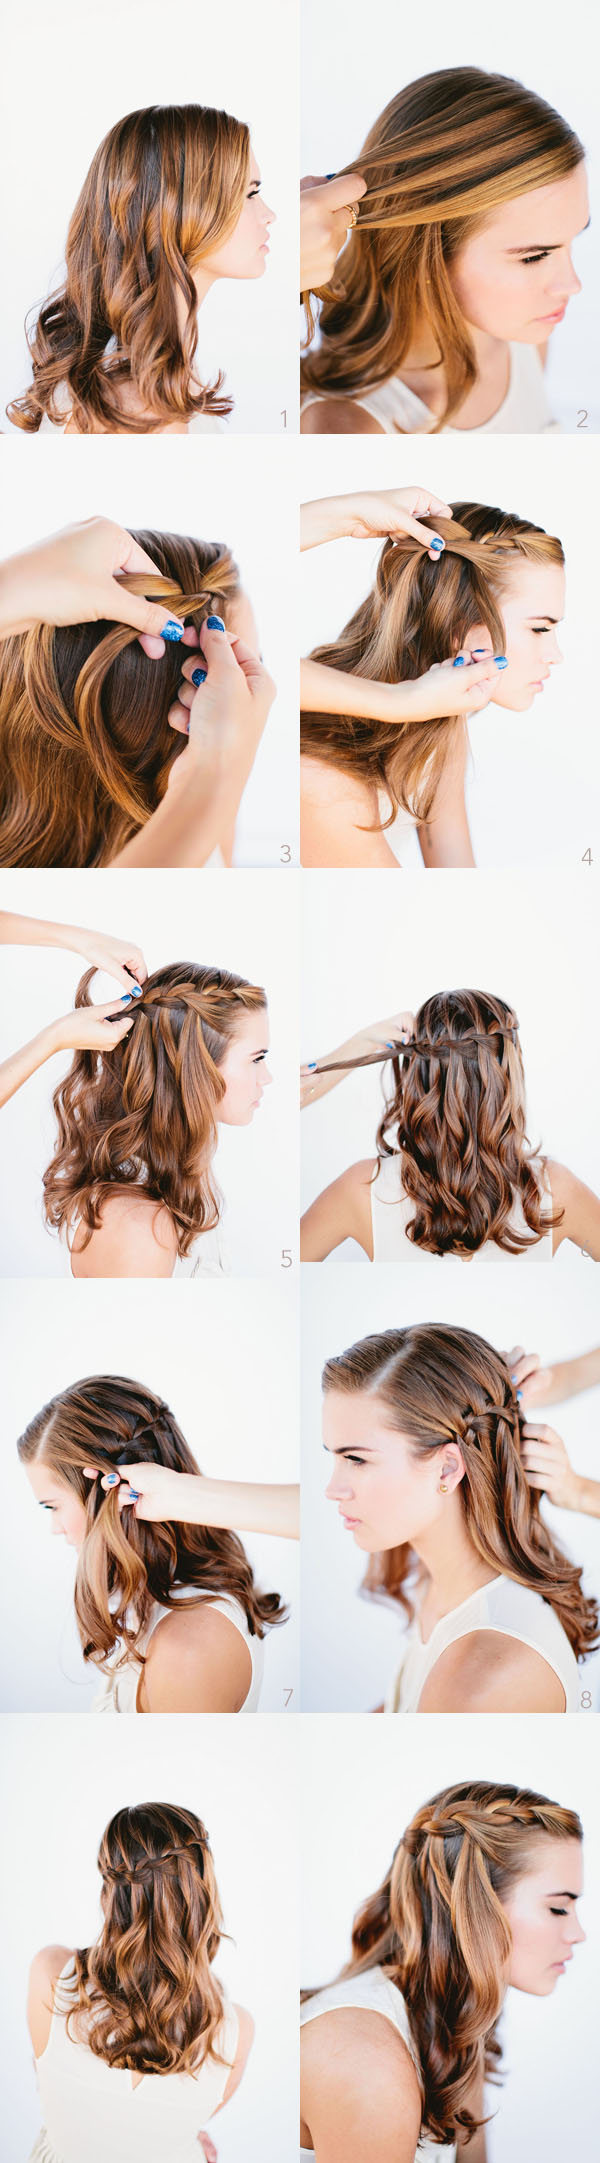 How To Hair Styles